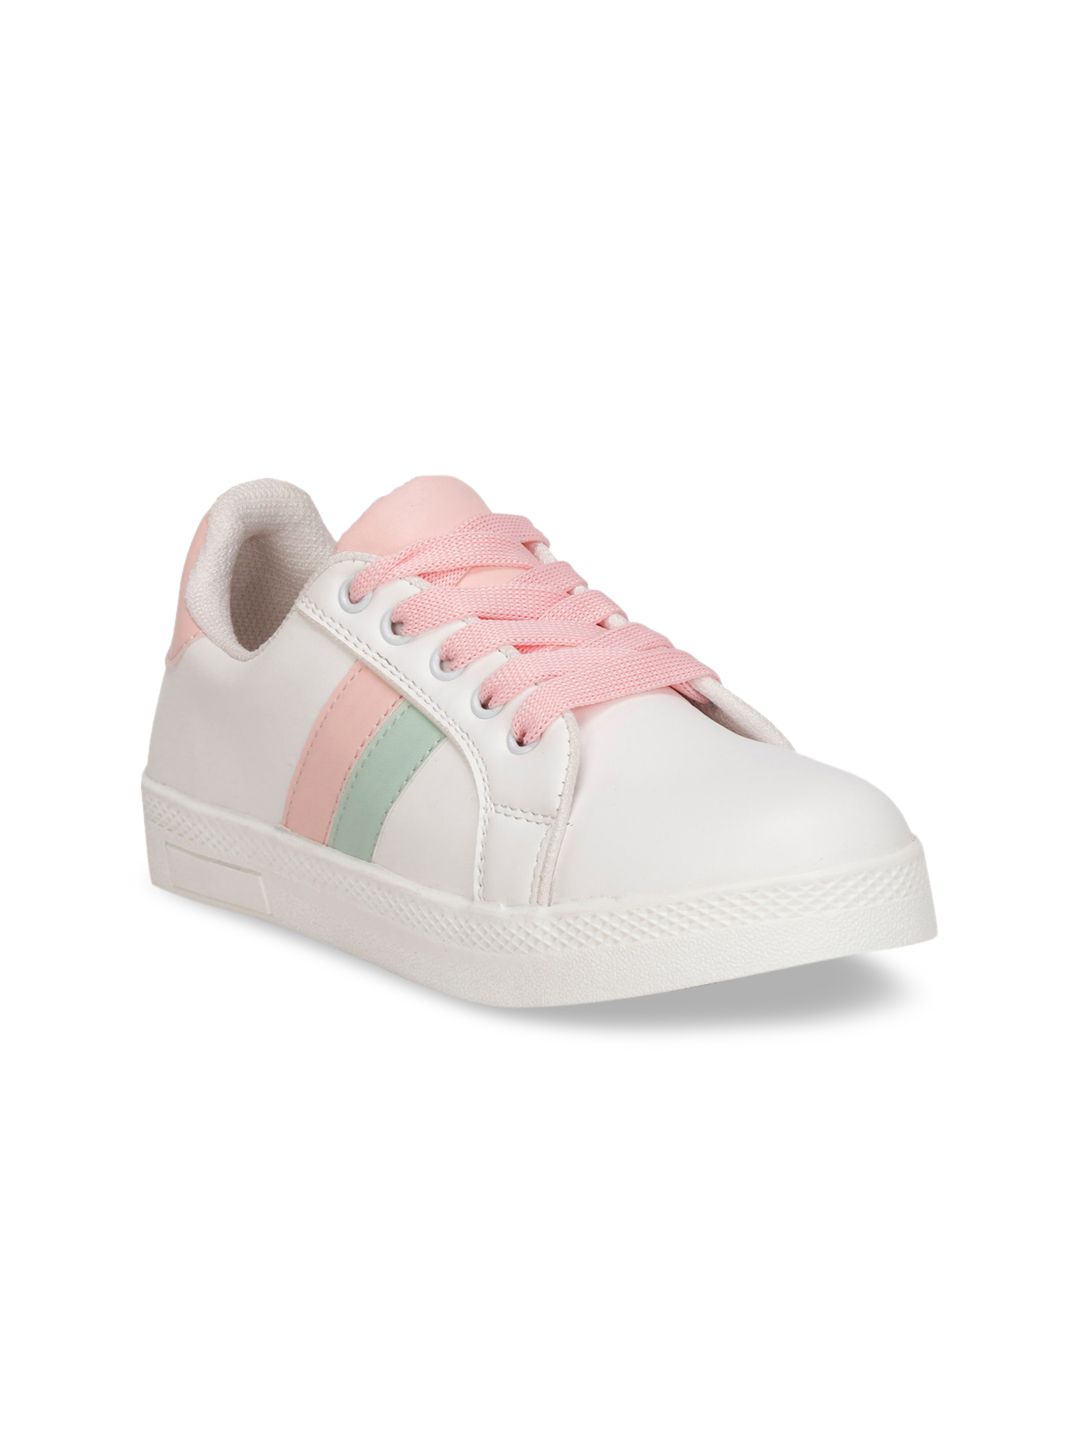 Denill Women Pink Lace Up Sneakers Price in India